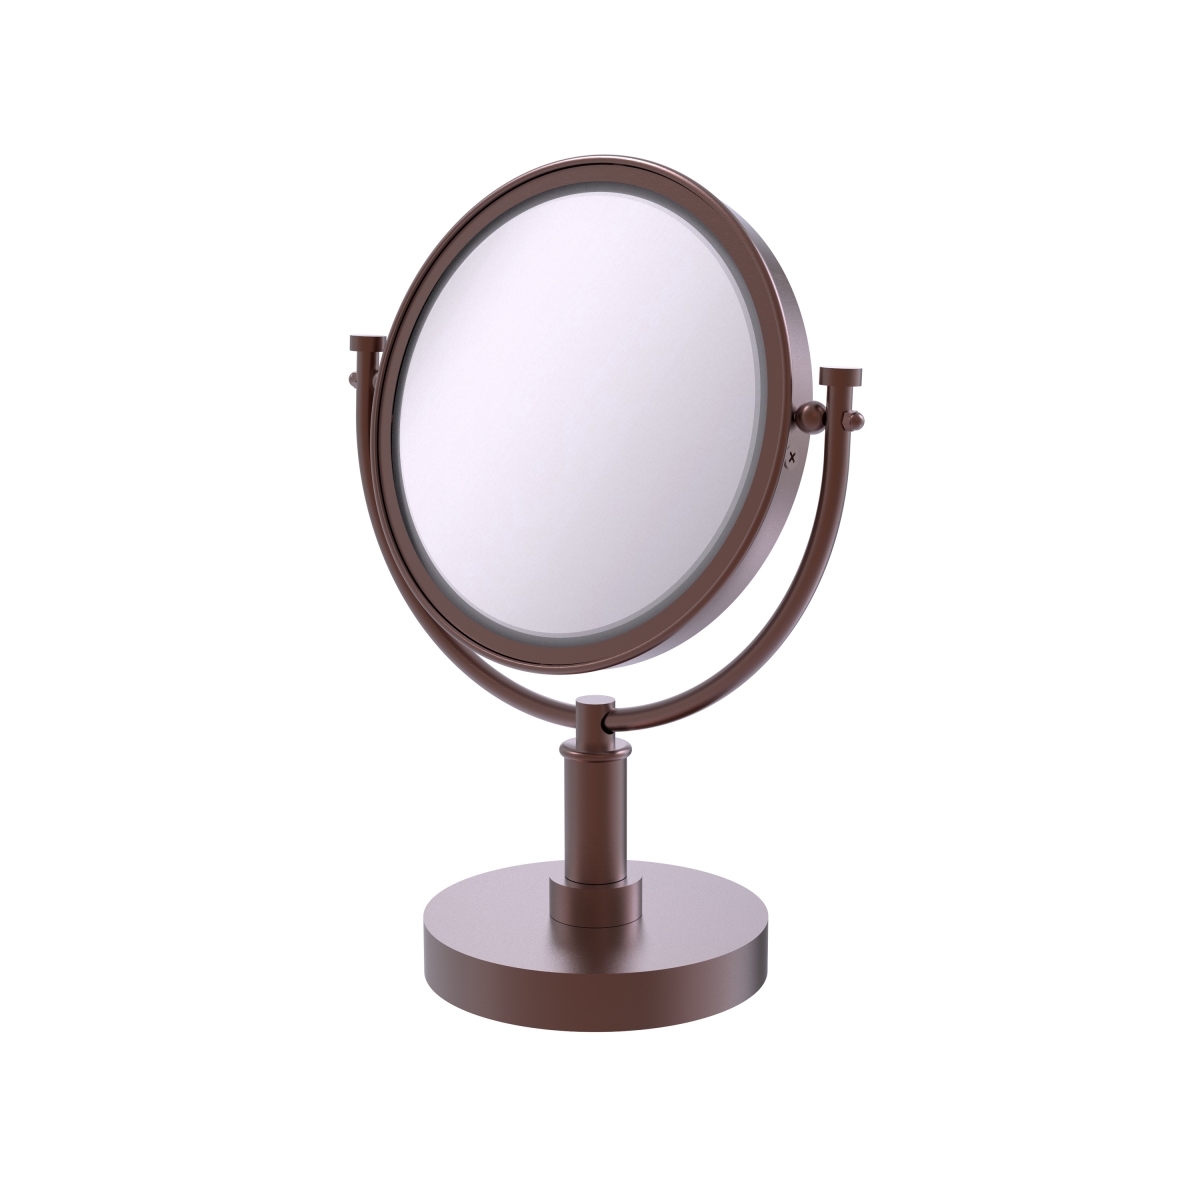 Picture of Allied Brass DM-4-5X-CA 8 in. Vanity Top Make-Up Mirror 5X Magnification, Antique Copper - 15 x 8 x 8 in.